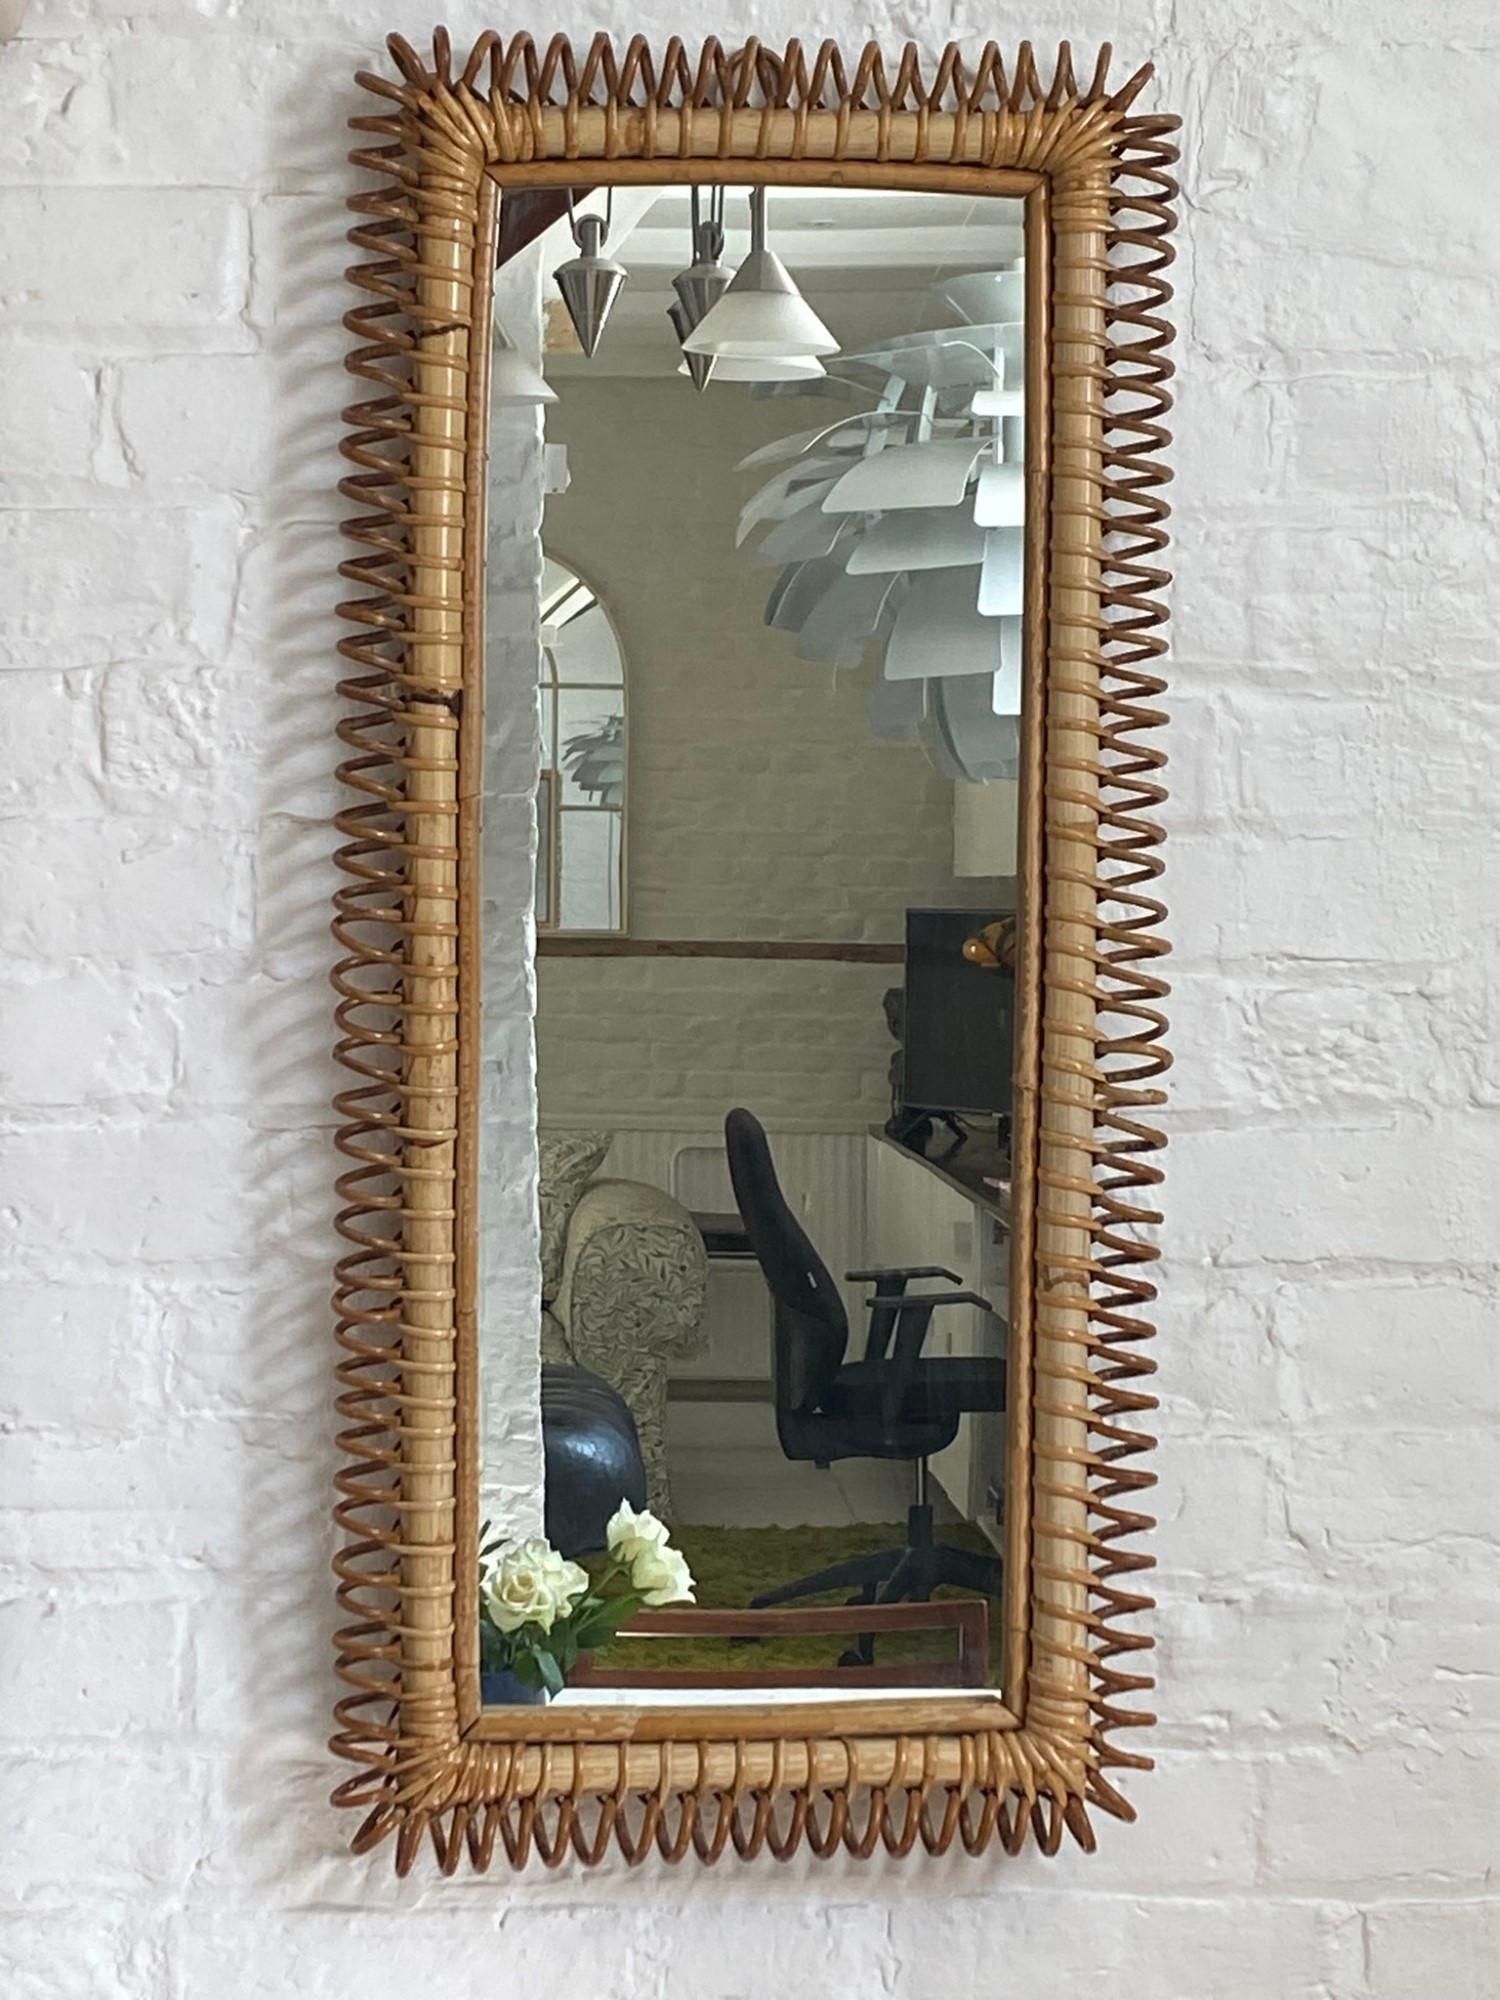 Rare Mid Century Italian Rattan Bamboo Wall Mirror Franco Albini, Italian, 1960s 

Superb mid-century rectangular rattan wall mirror. This Mid-Century Modern mirror is attributed to Franco Albini and was produced in the 1960s in Italy by Vittorio